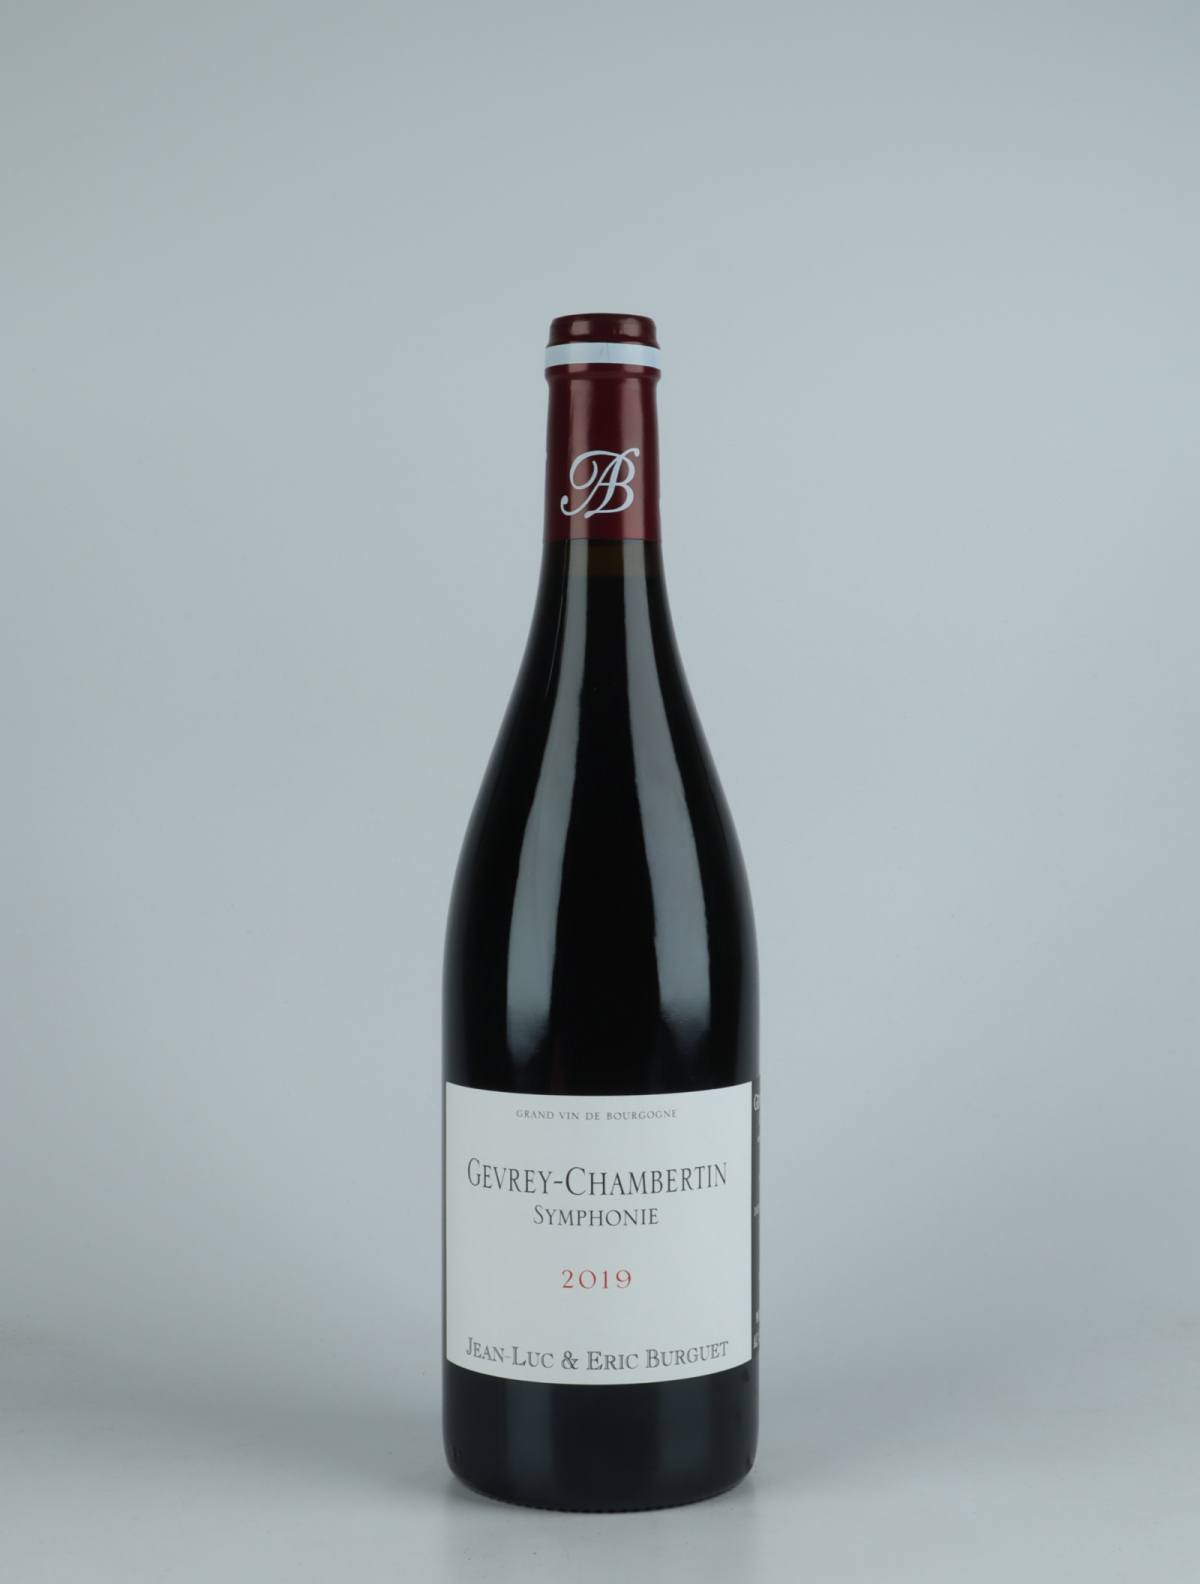 A bottle 2019 Gevrey-Chambertin - Symphonie Red wine from Jean-Luc & Eric Burguet, Burgundy in France